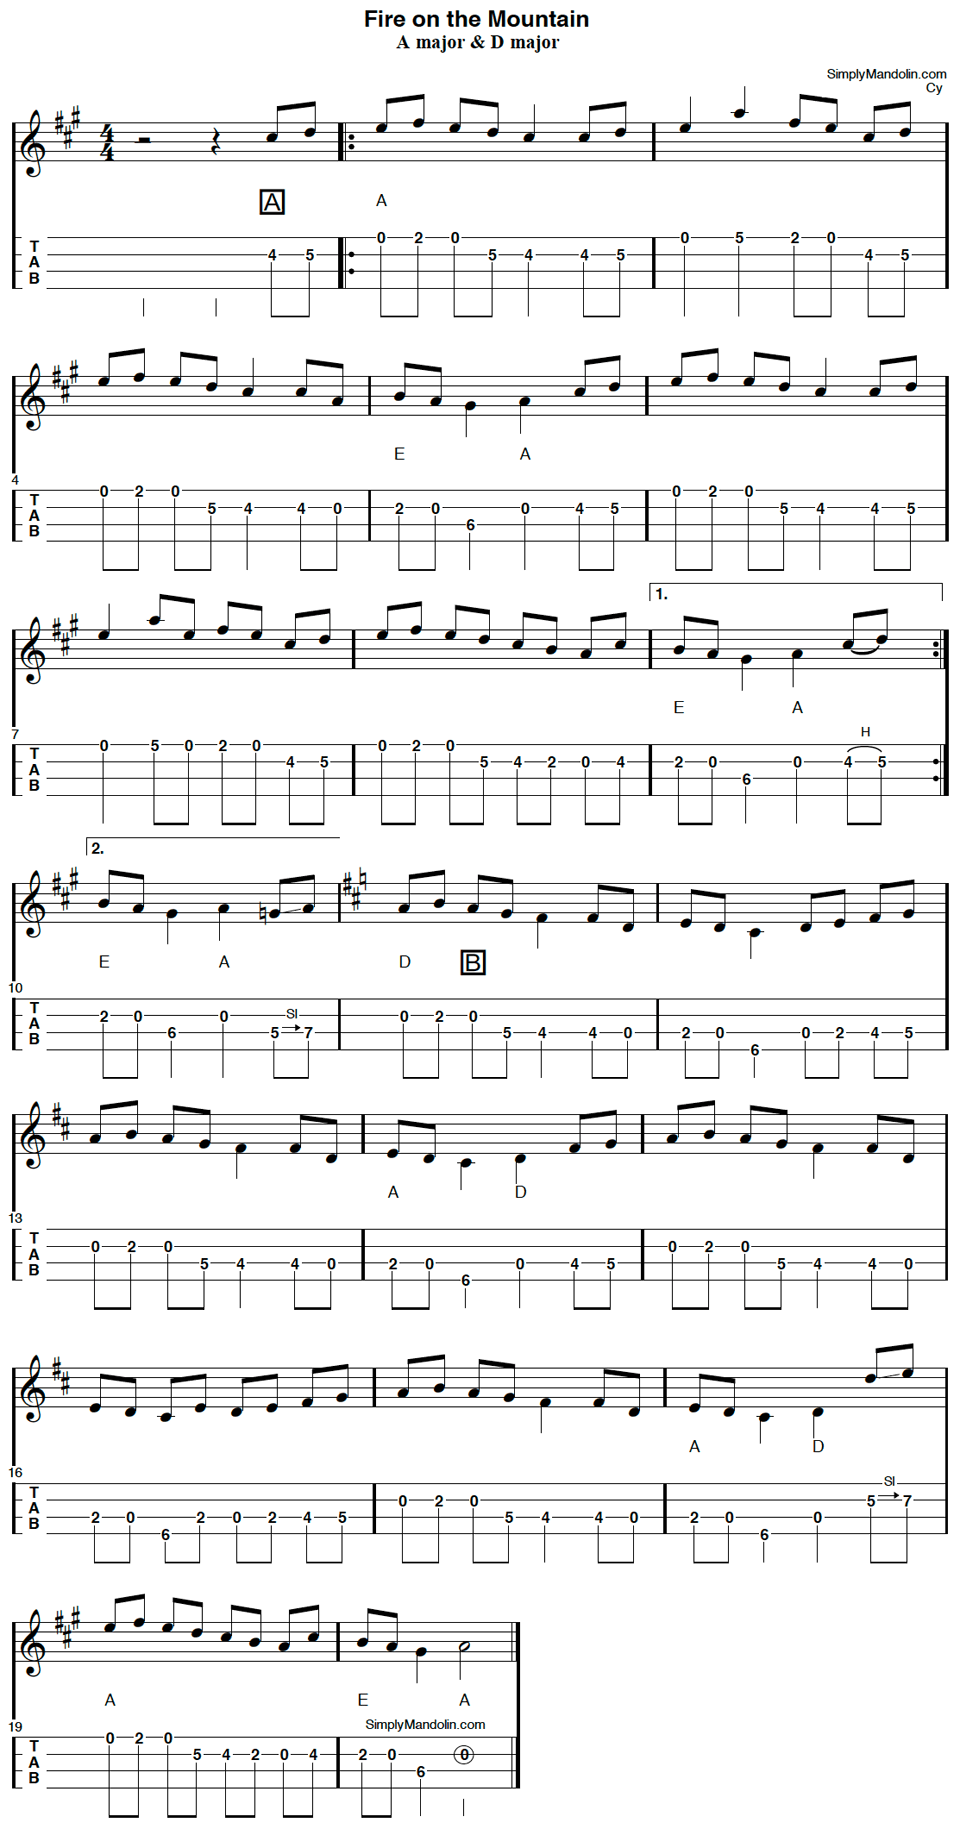 image of mandolin tab for the tune "Fire on the Mountain".